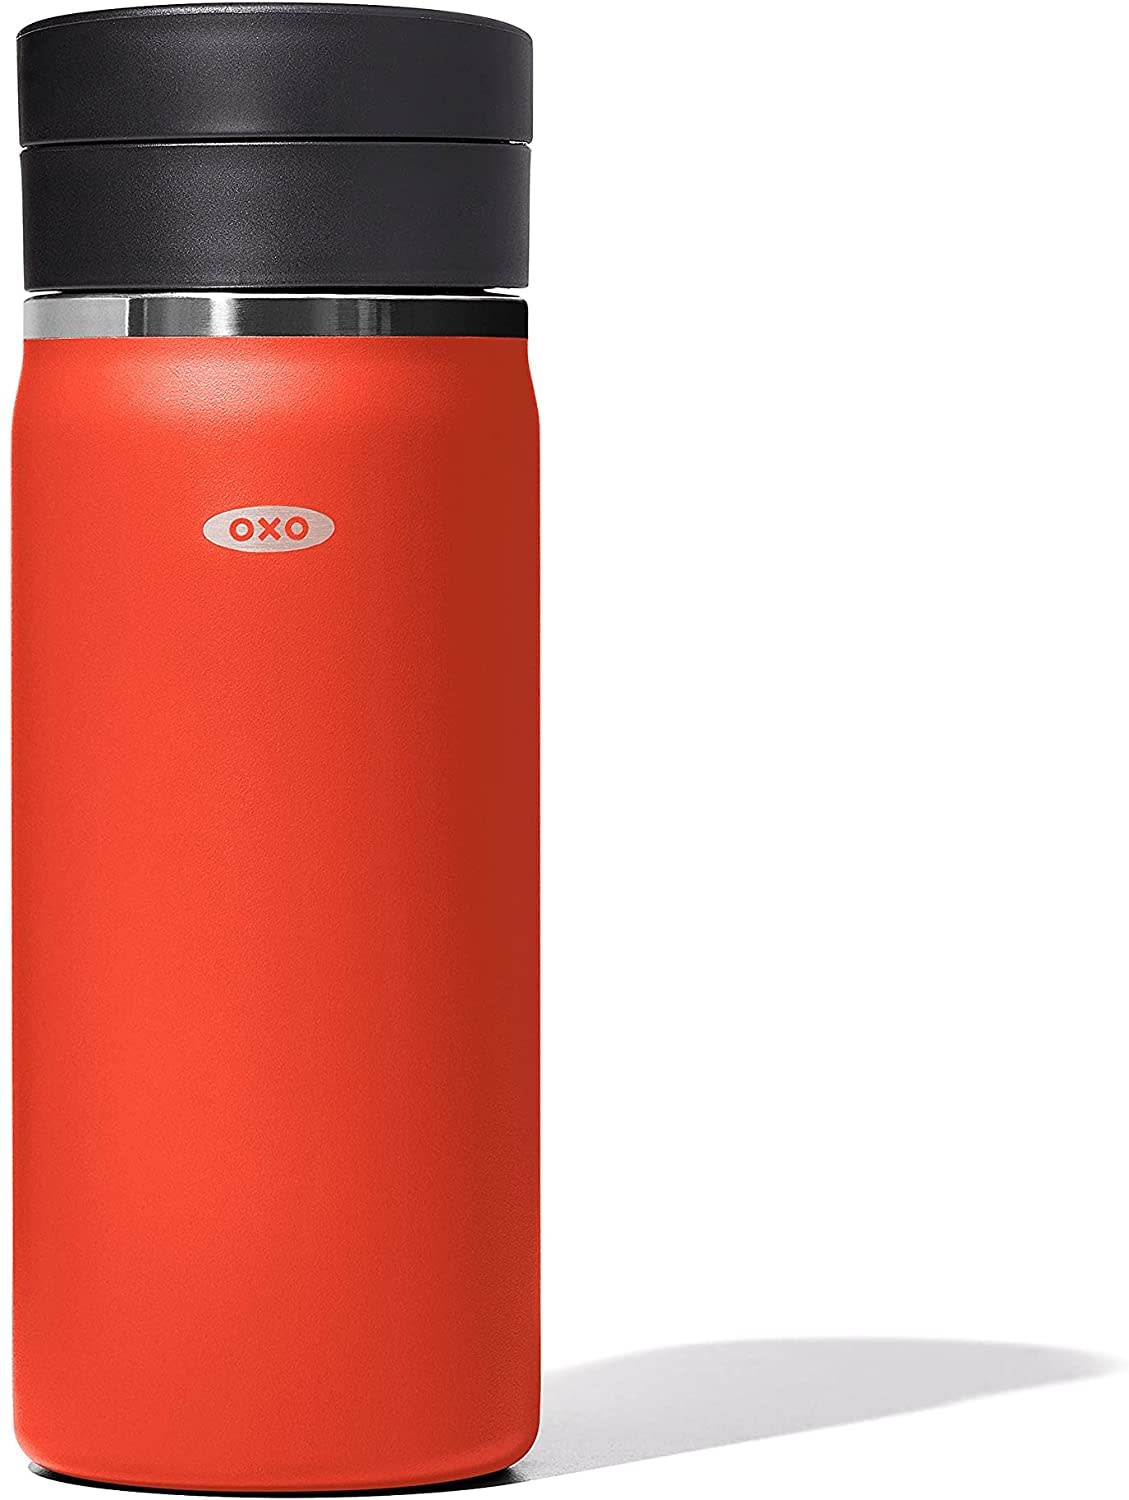 OXO Thermal Mug with SimplyClean Lid 16oz Chili - Spoons N Spice